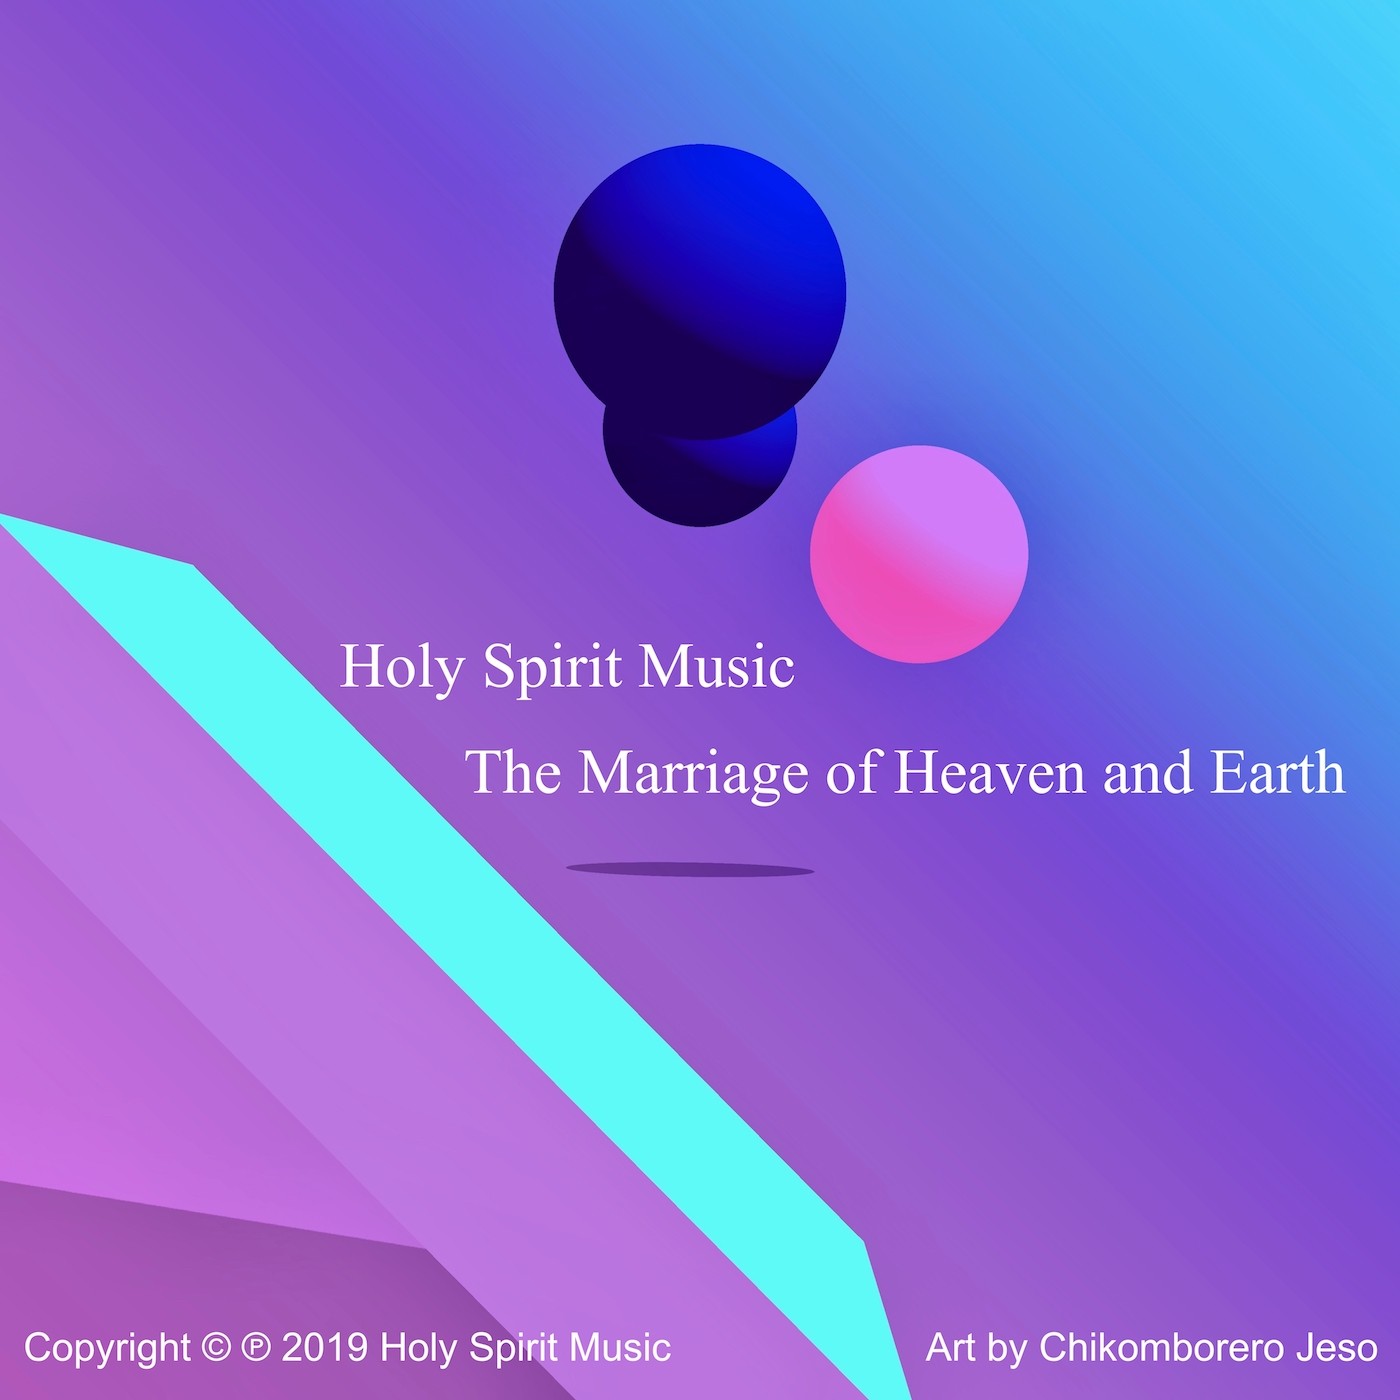 Holy Spirit Music - The Marriage of Heaven and Earth - Music Cover Art